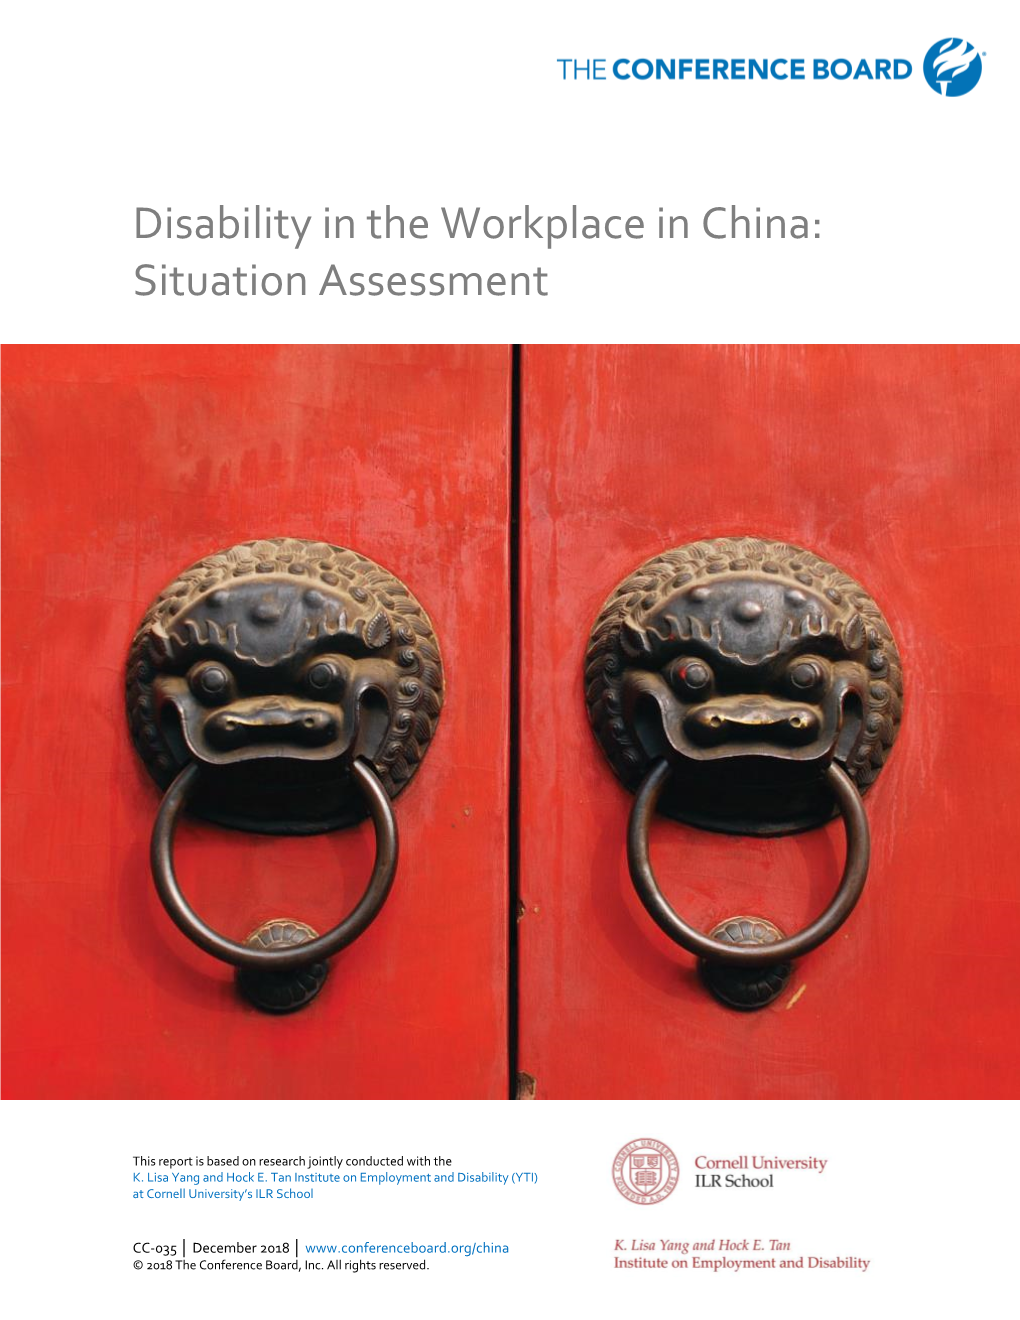 Disability in the Workplace in China: Situation Assessment